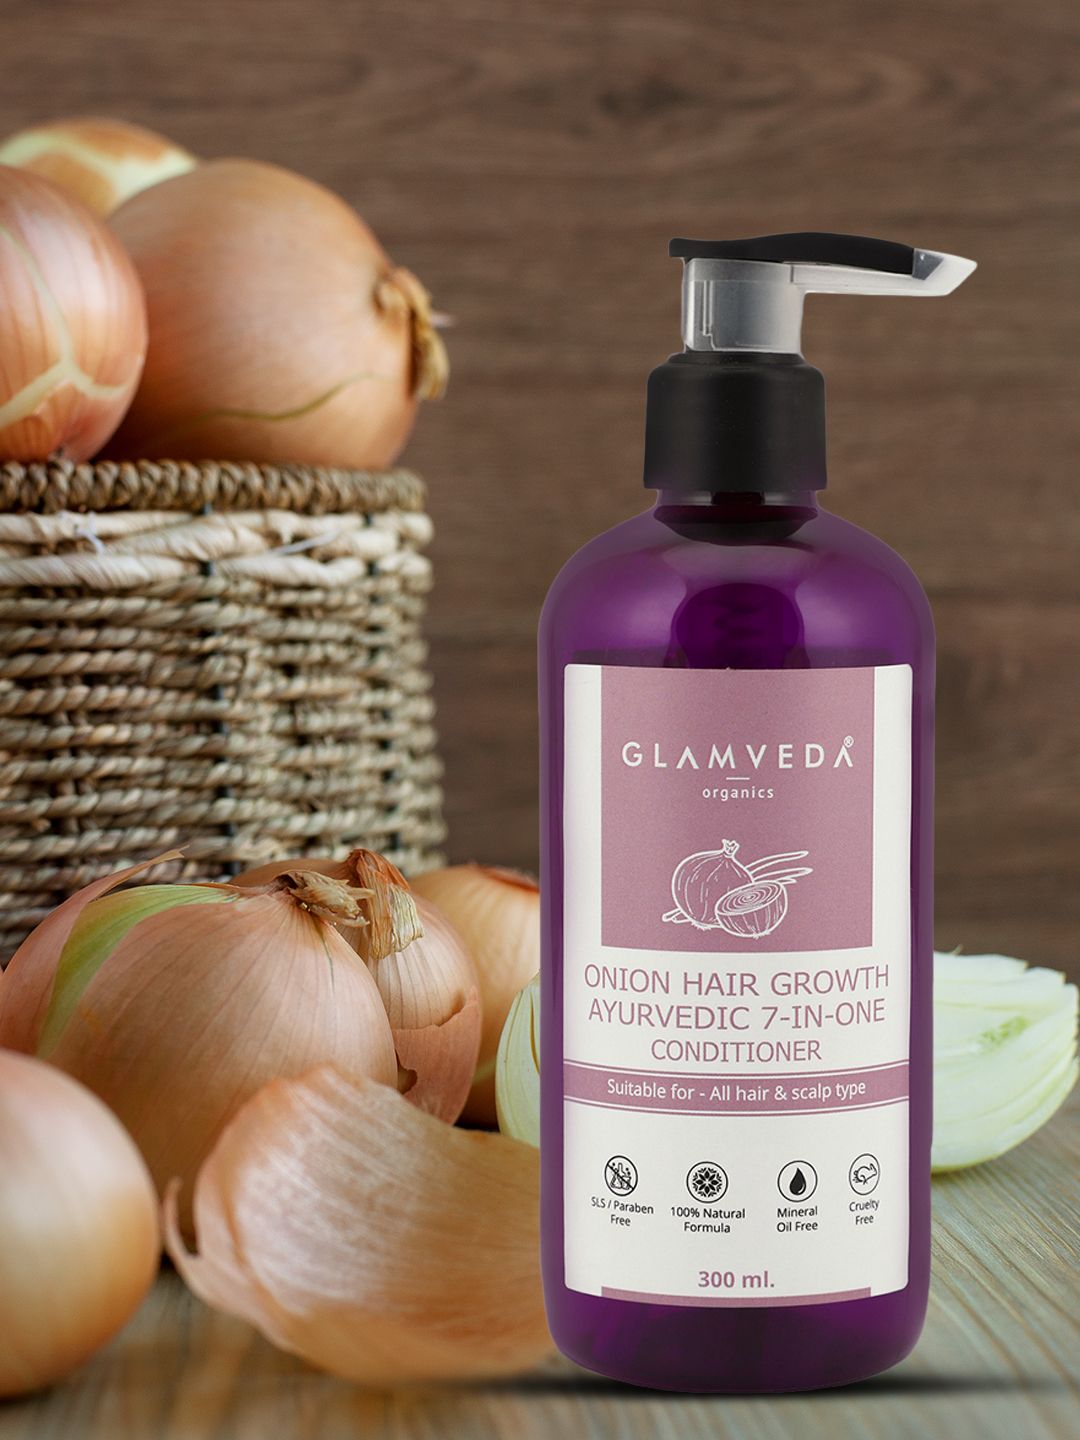 Glamvedas Onion 7 In One Ayurvedic Hair Growth Conditioner-300ml Price in India